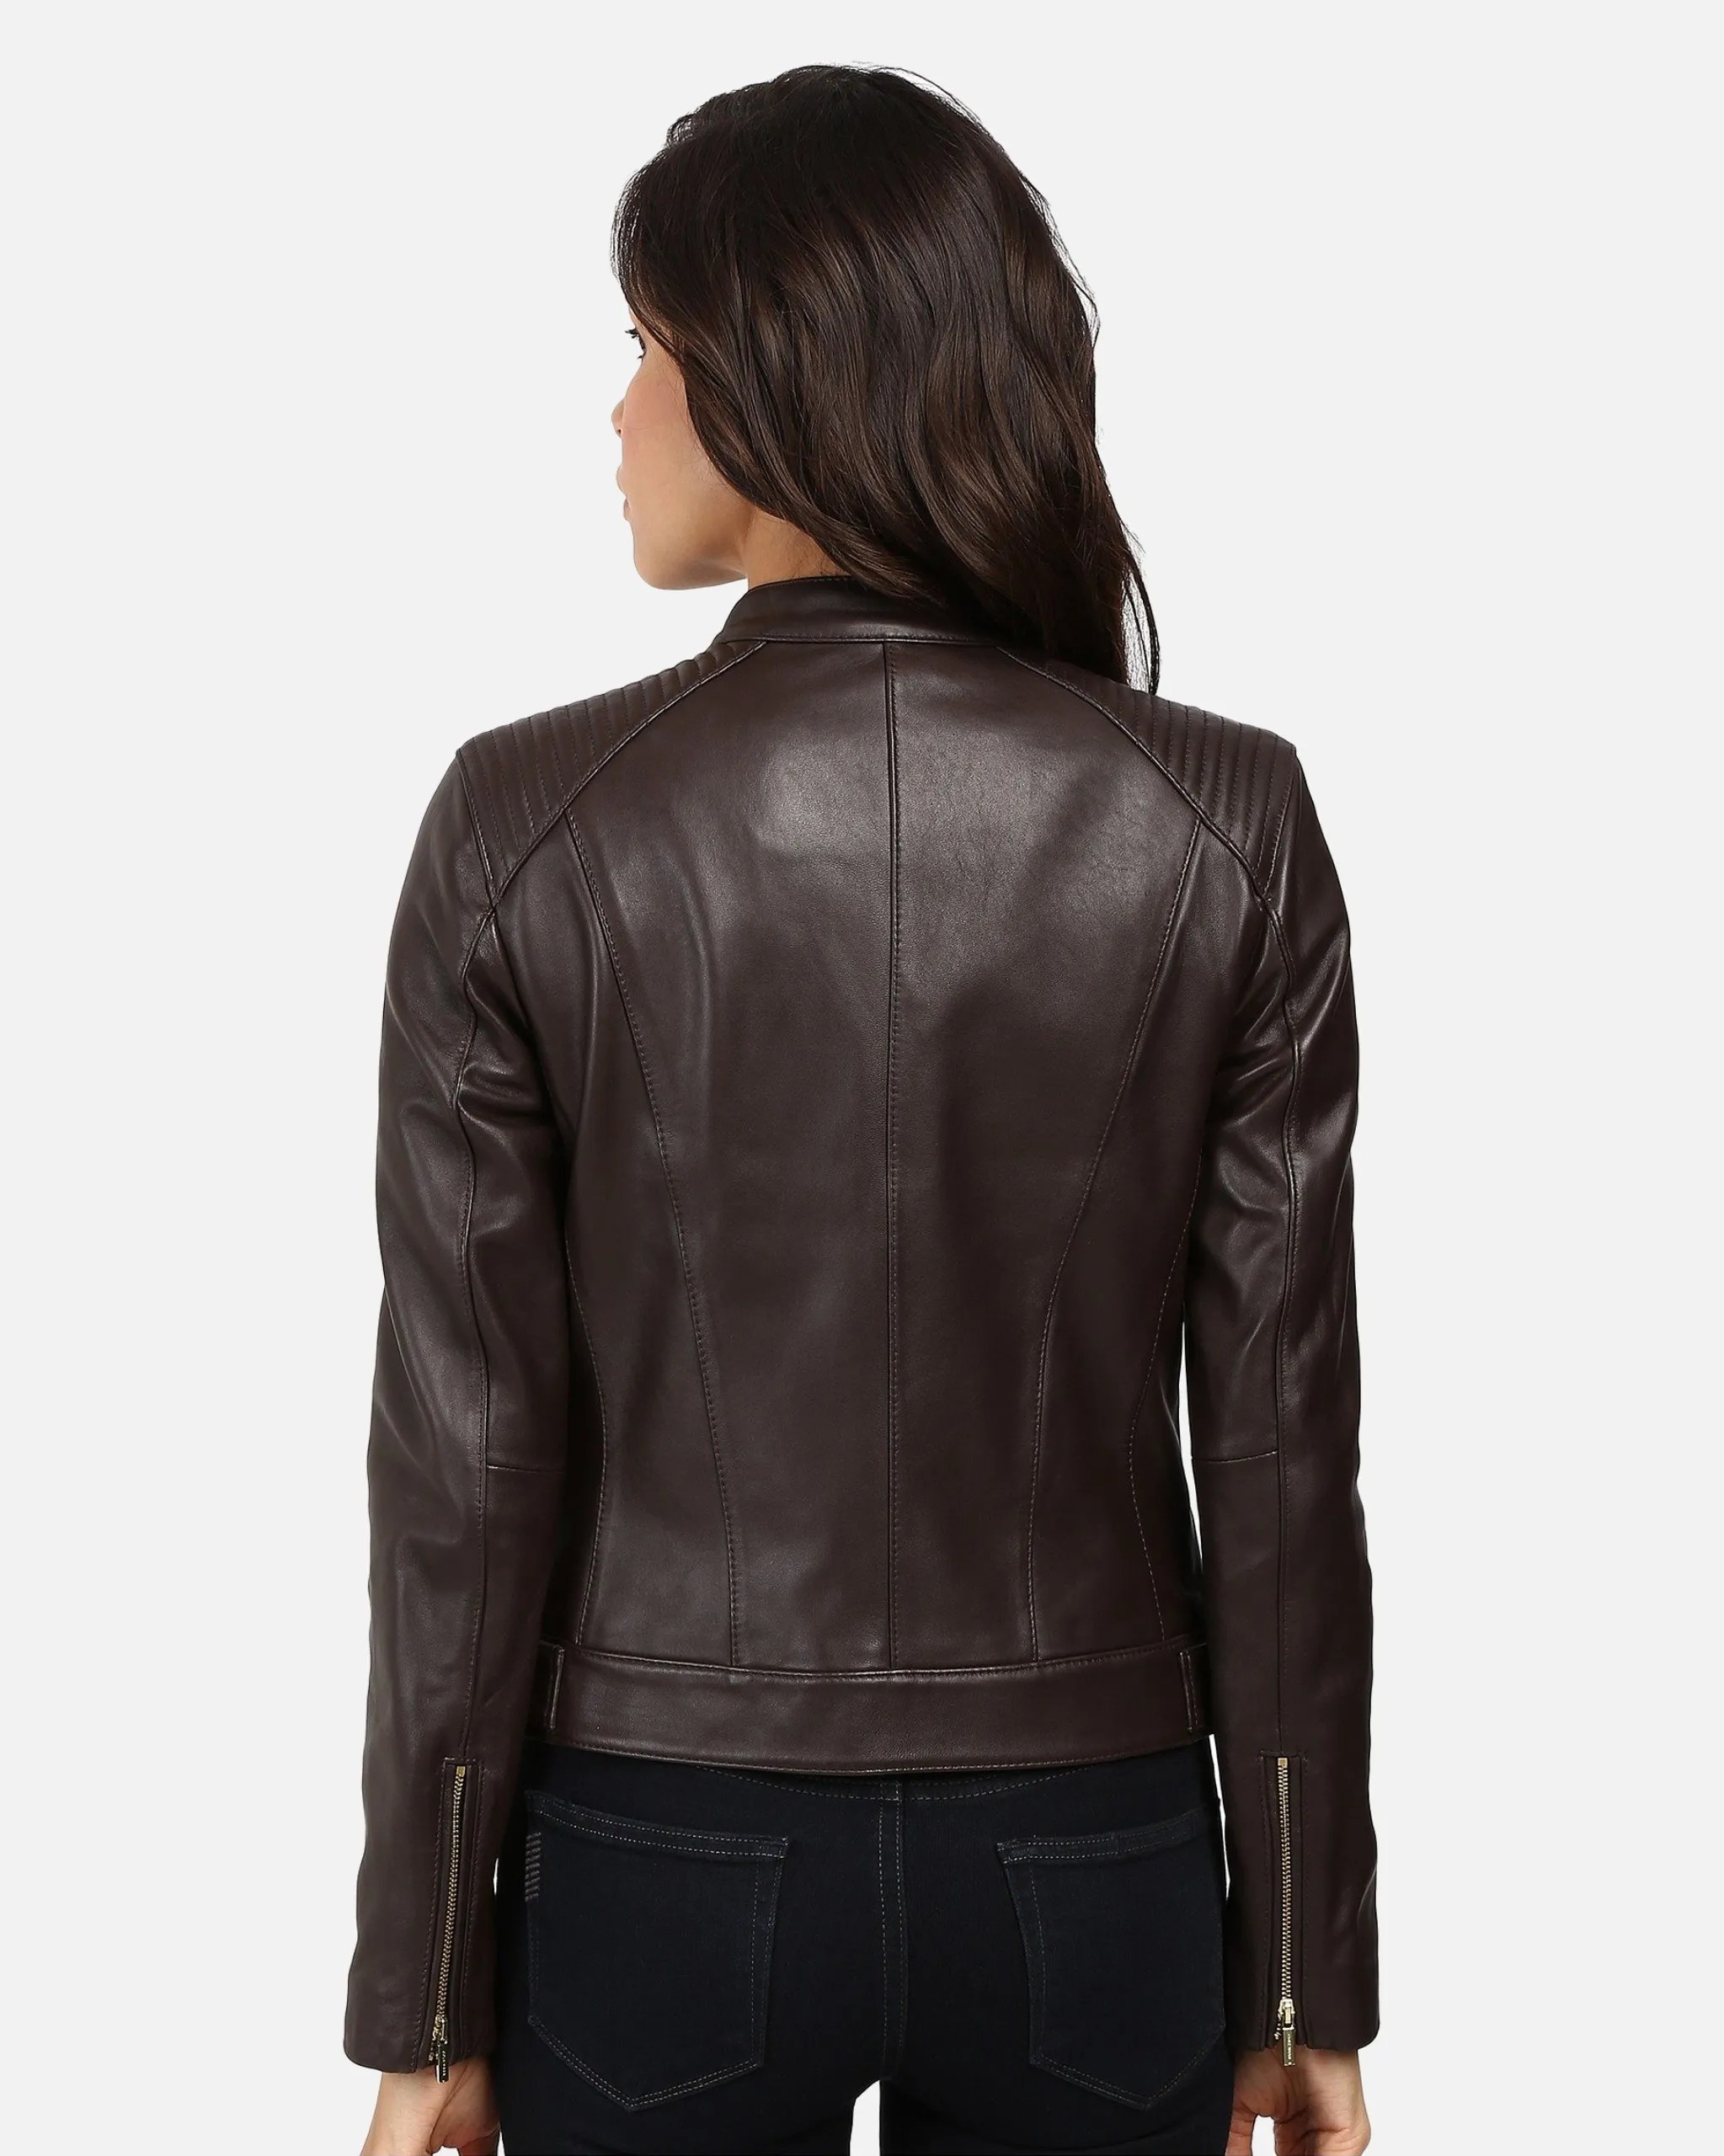 womens-black-leather-racer-jacket-genuine-lambskin-stand-collar (2)